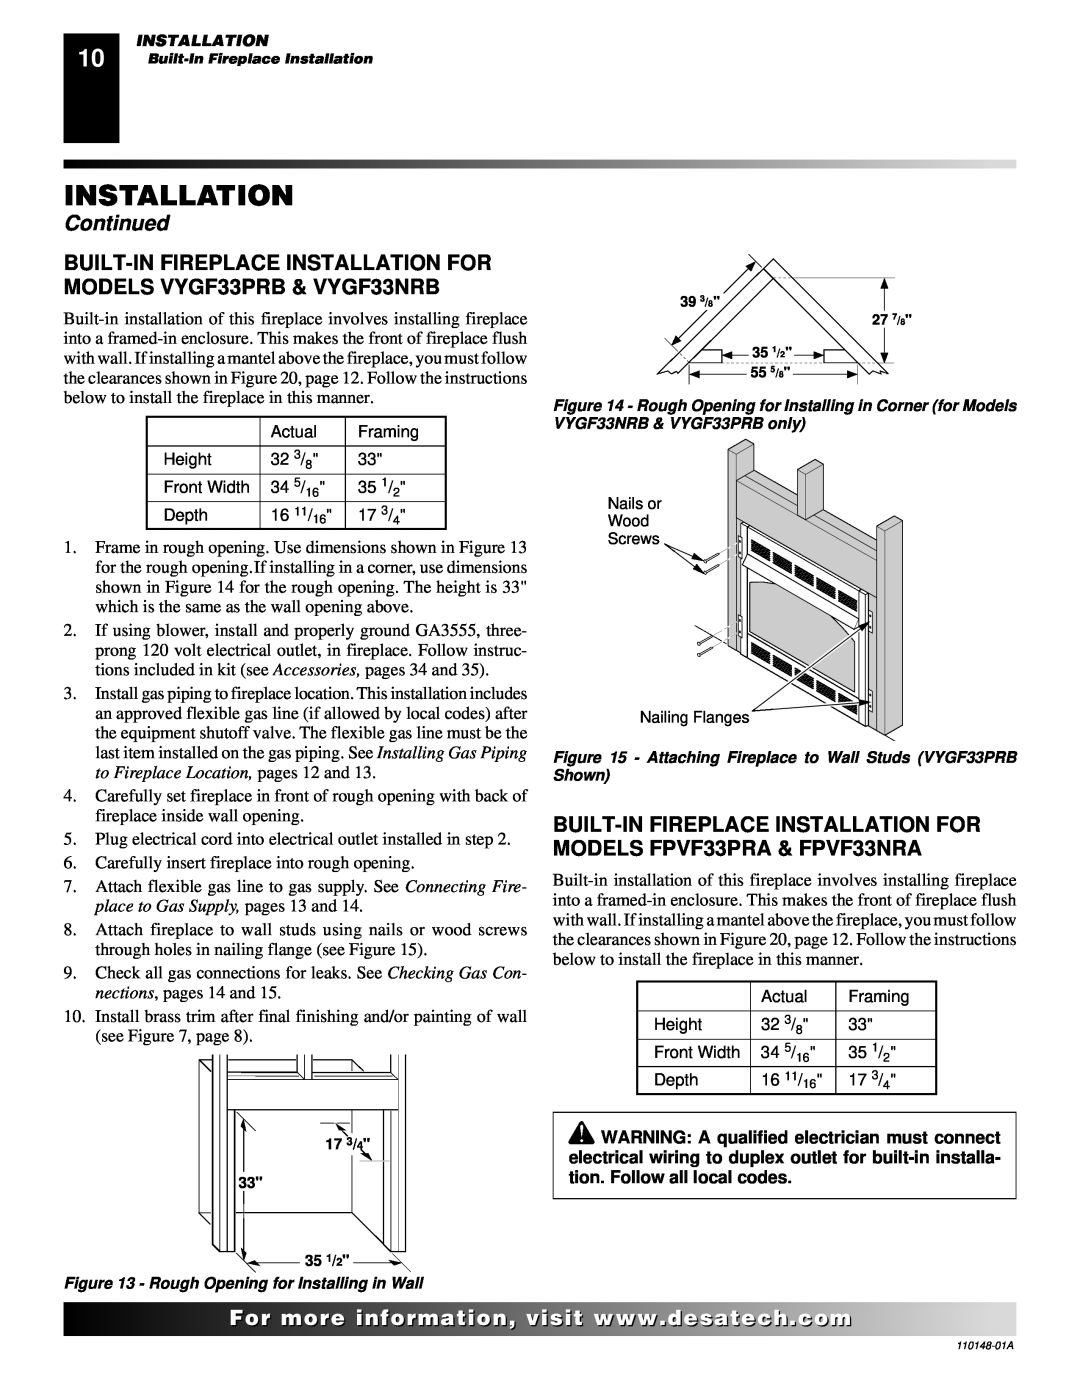 Desa VYGF33PRB, VYGF33NRB installation manual Installation, Continued, Carefully insert fireplace into rough opening 